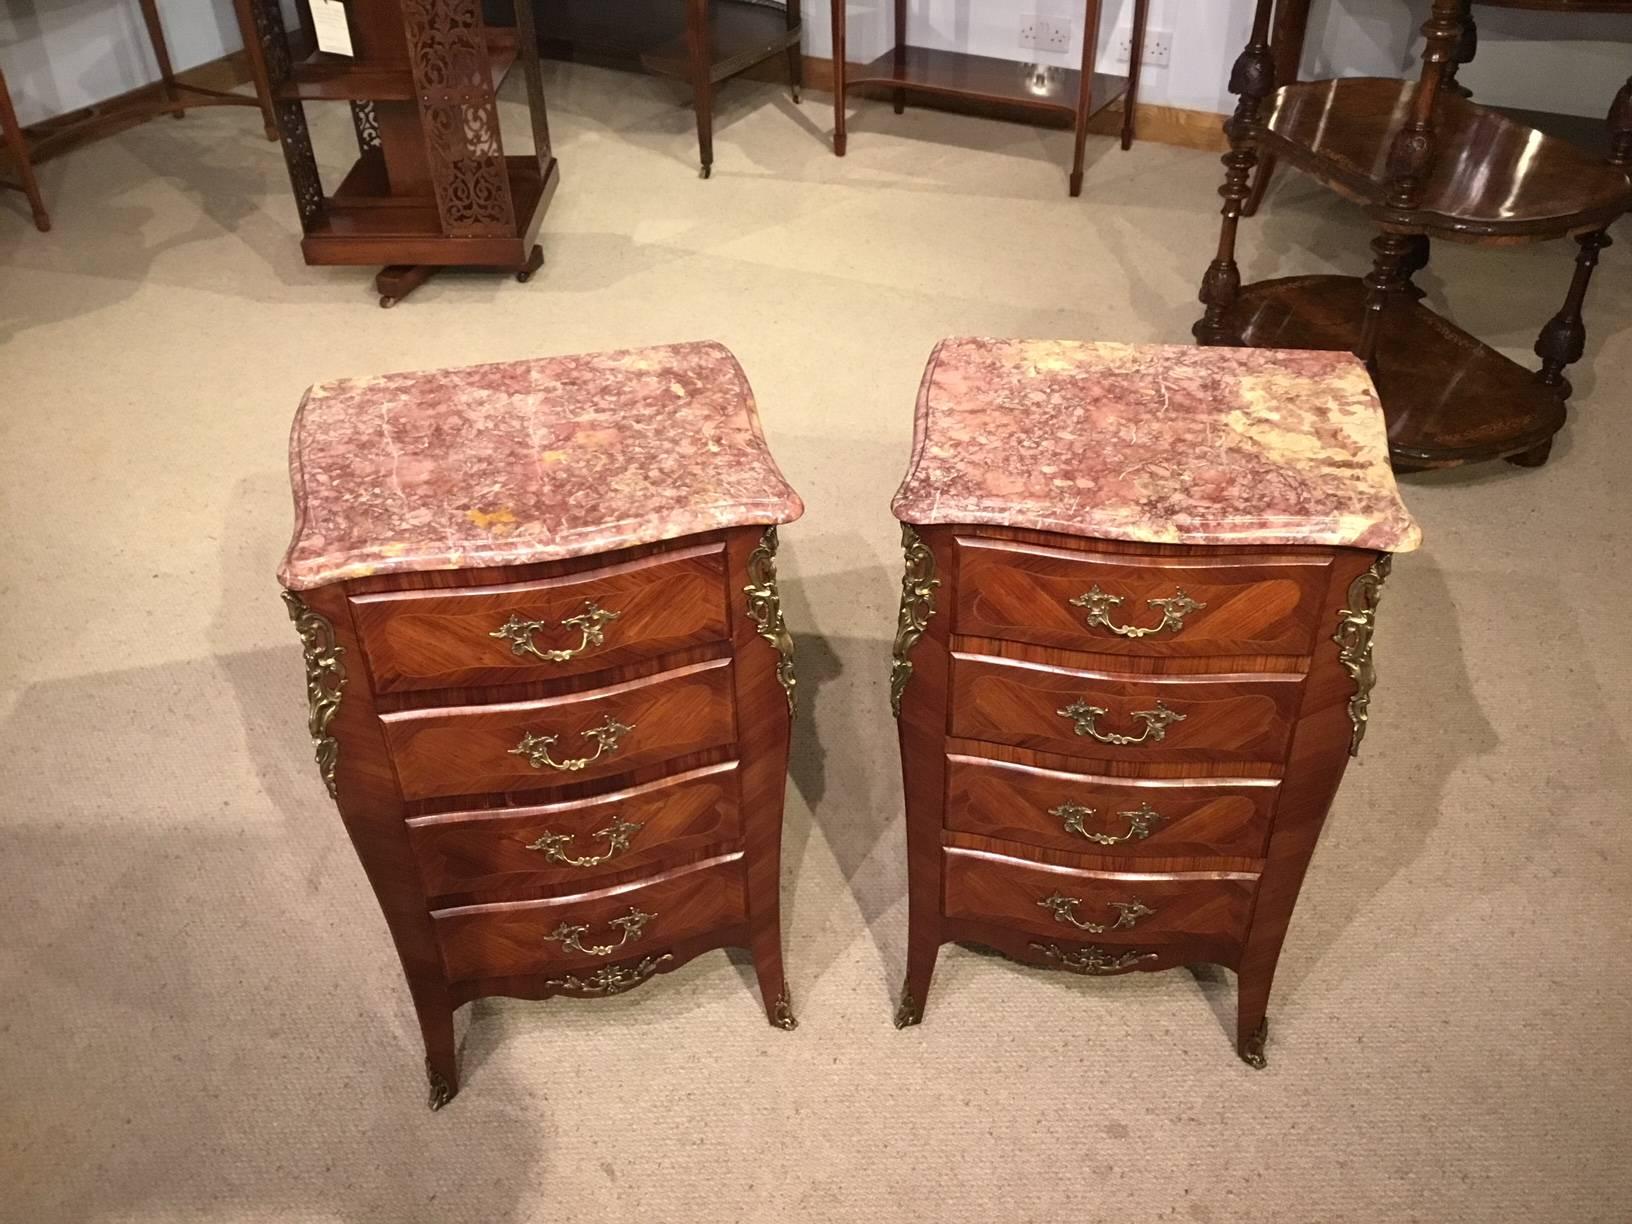 A fine pair of late 19th century French kingwood and ormolu-mounted bedside chests. Each having a shaped Spanish brocatelle serpentine shaped marble top above an arrangement of four oak lined drawers with kingwood veneered fronts and finely cast